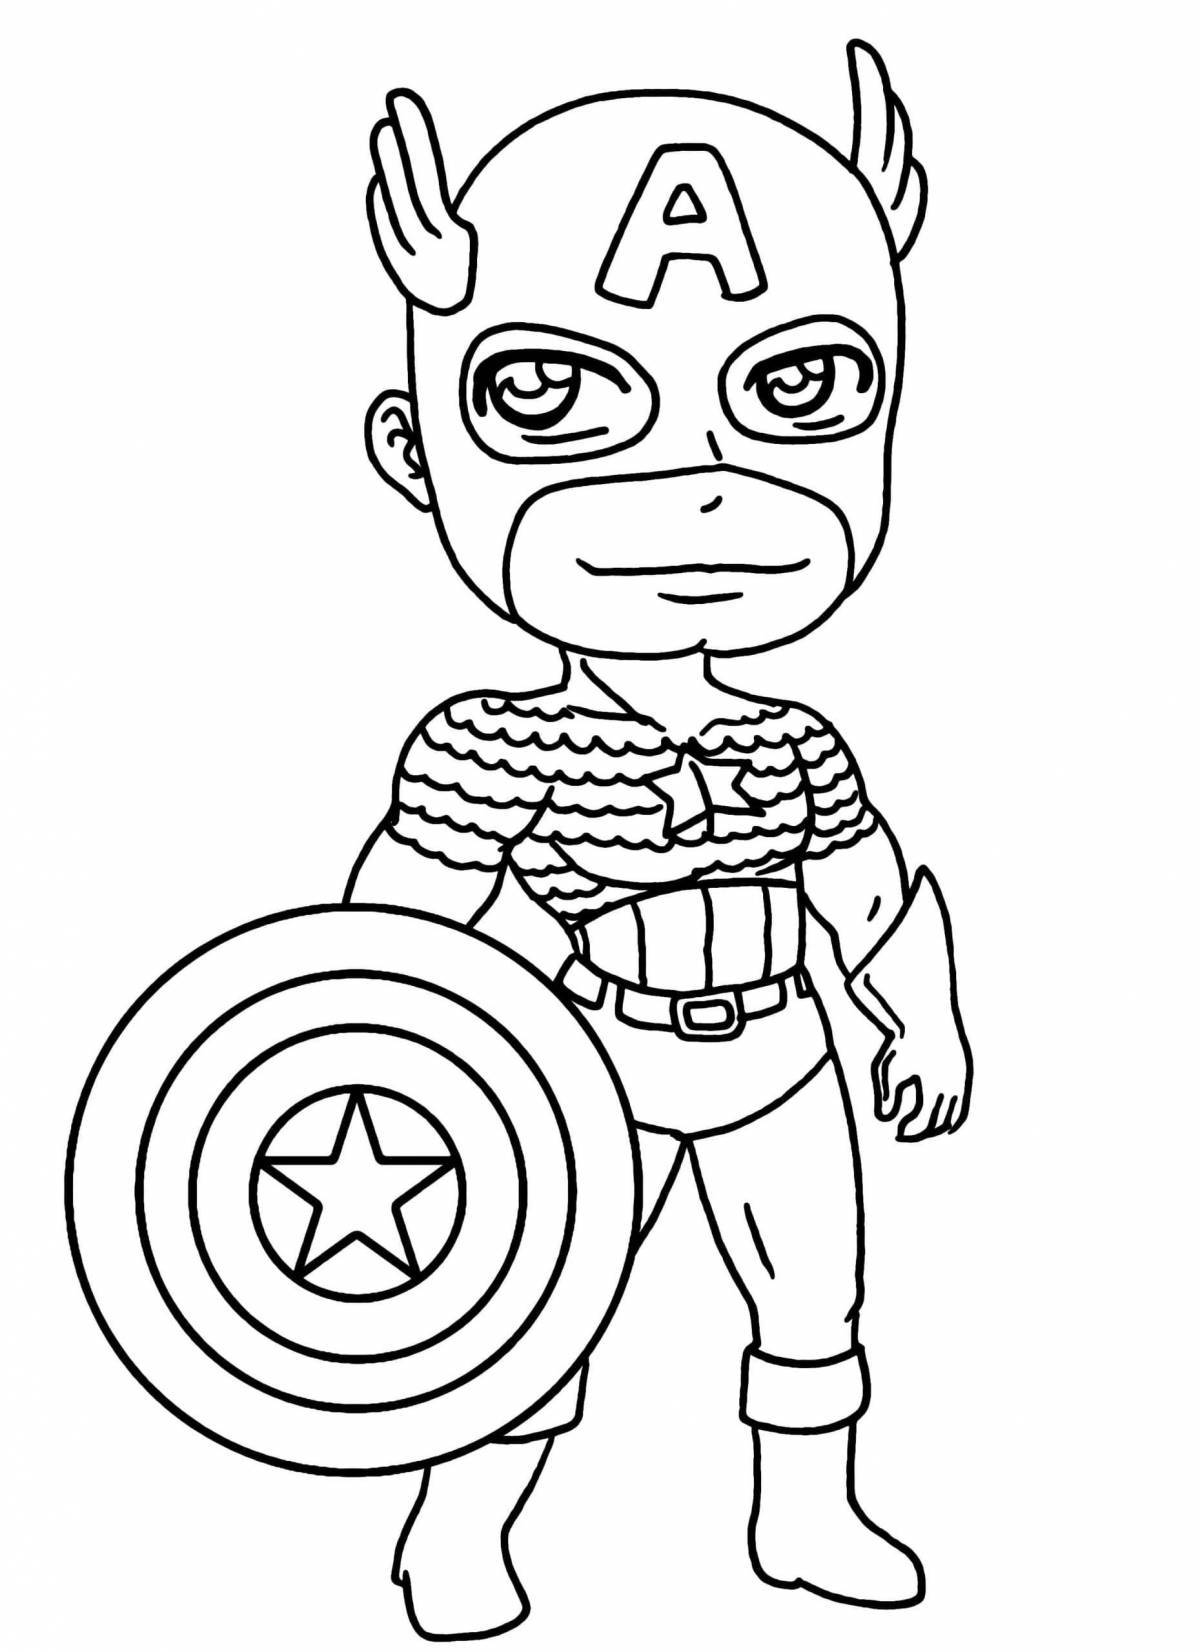 Heroic superhero coloring pages for boys